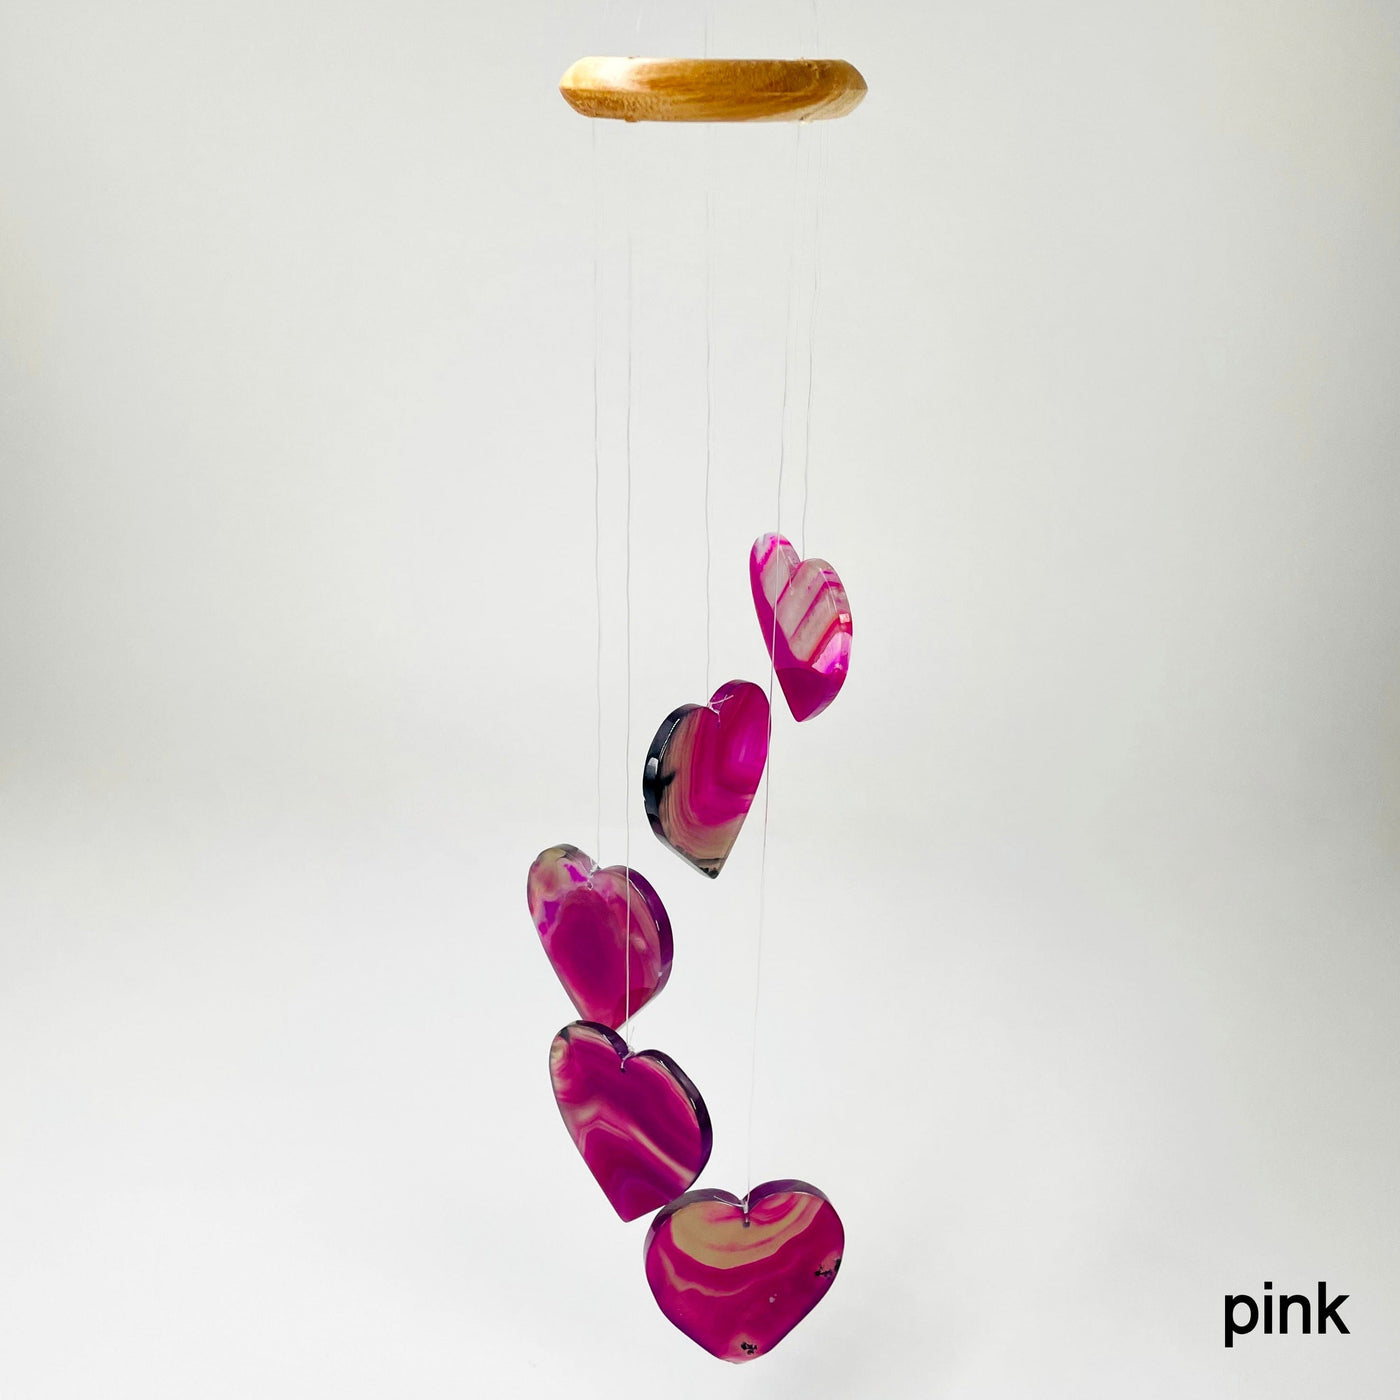 one pink agate heart wind chime hanging in front of white background